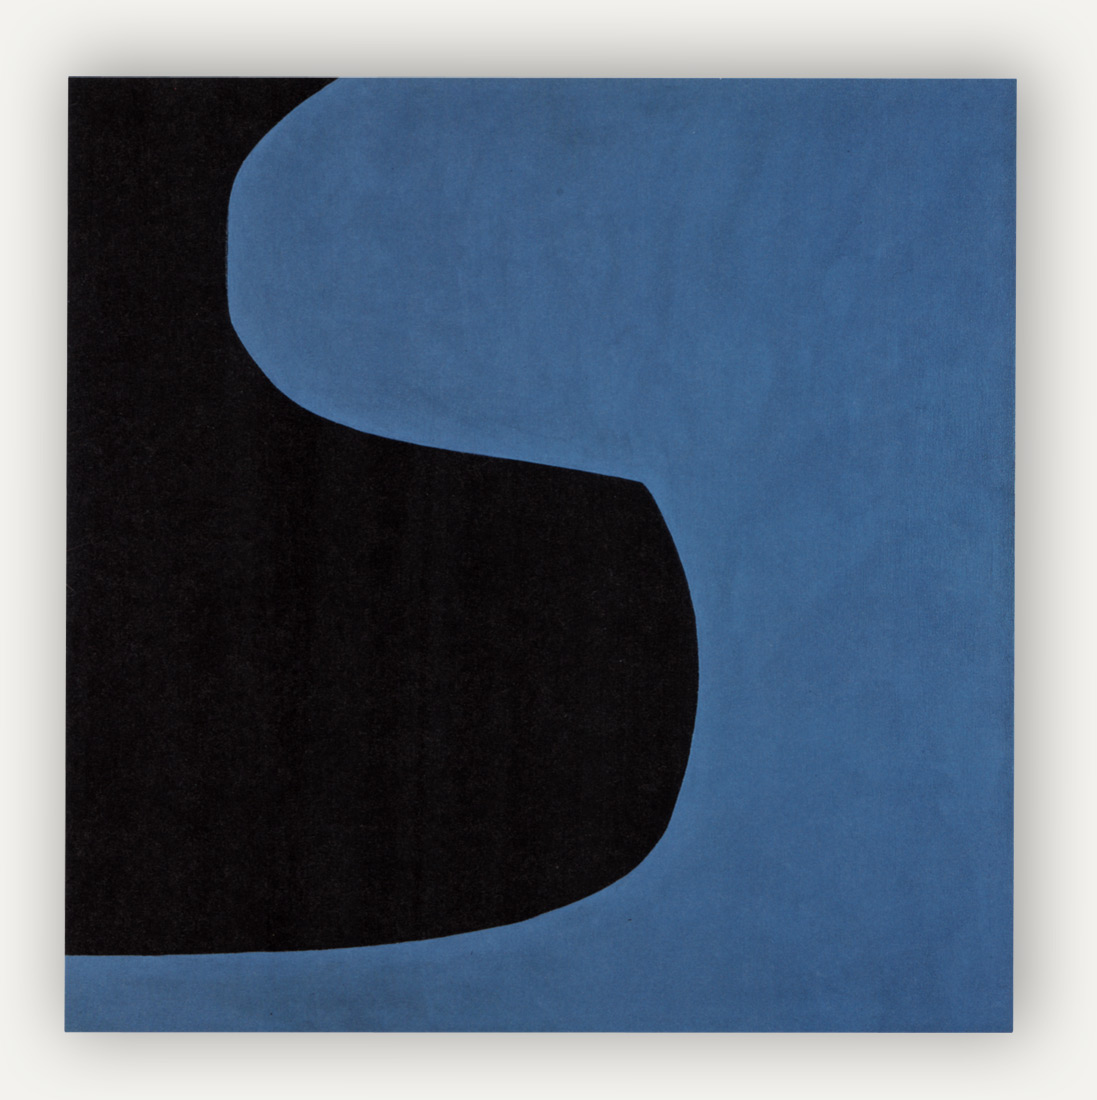 Square canvas with two shapes cutout to fit into each other perfectly, the black shape on the left protruded into the bottom half of the quare and the blue shape comes in from the top right, creating an S shape.